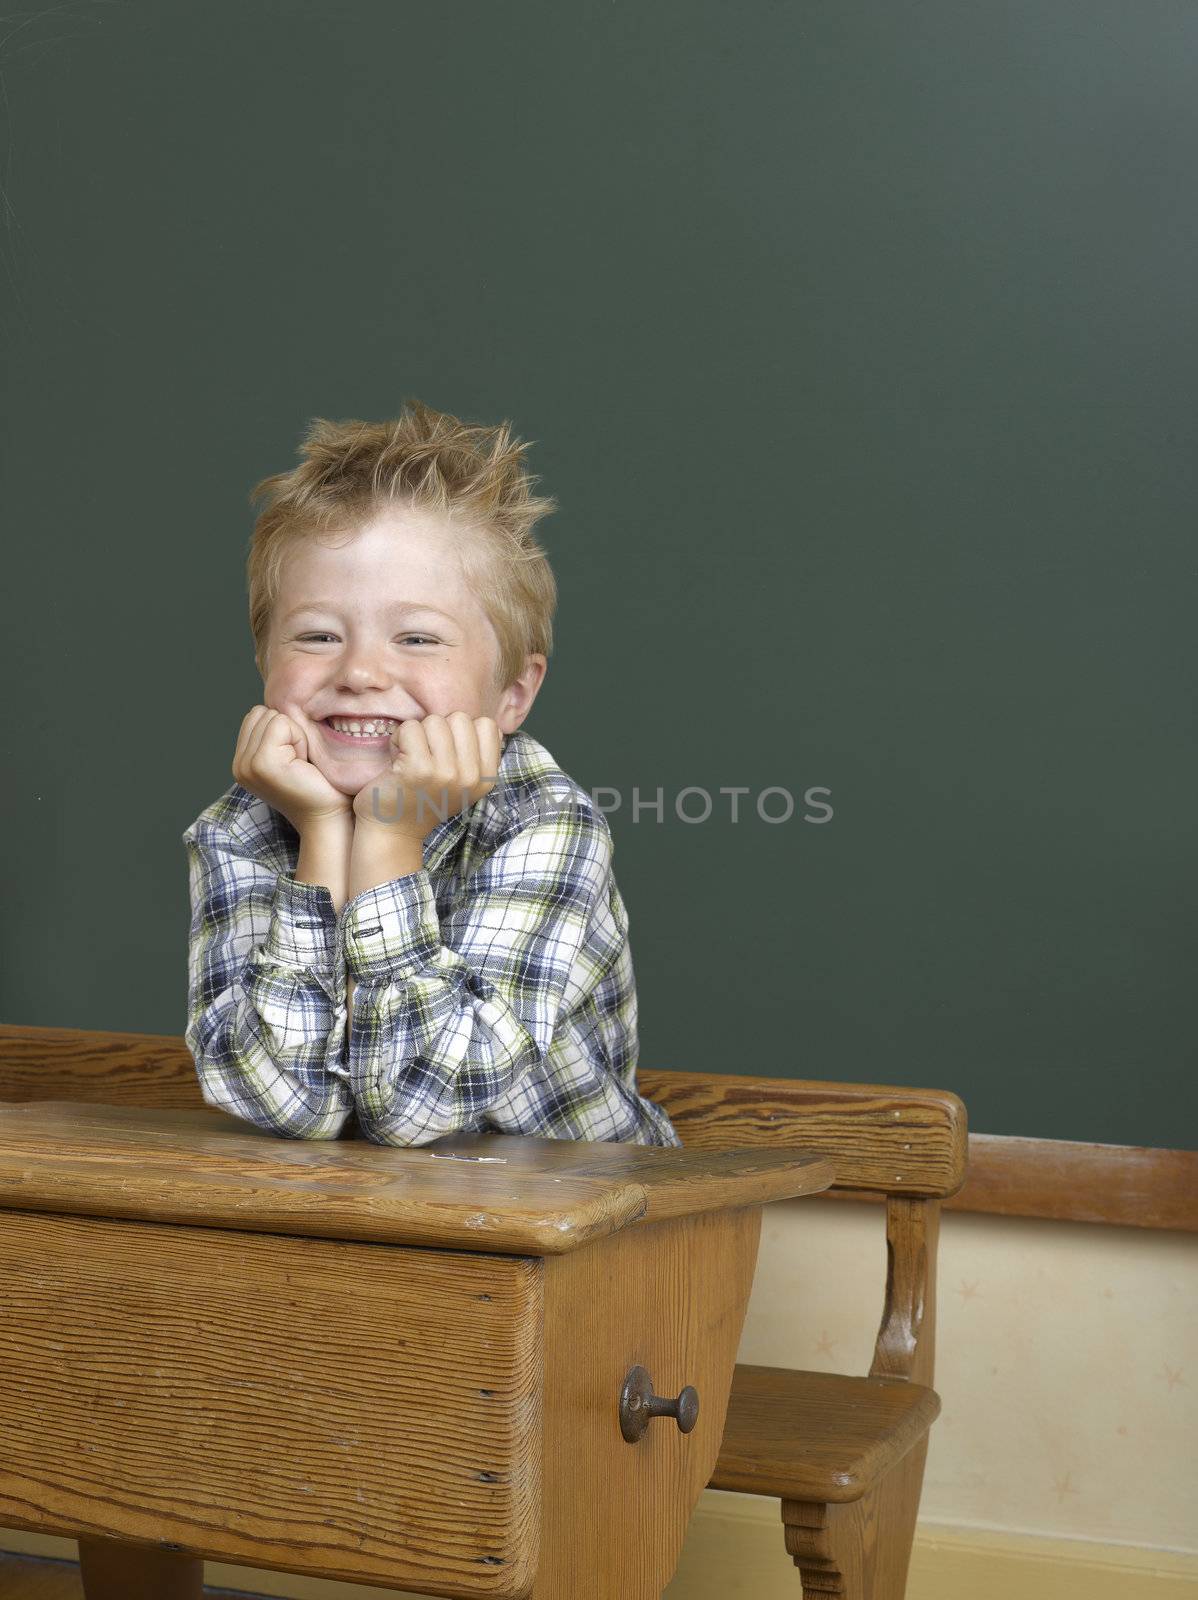 boy on a school desk in front of a background picture